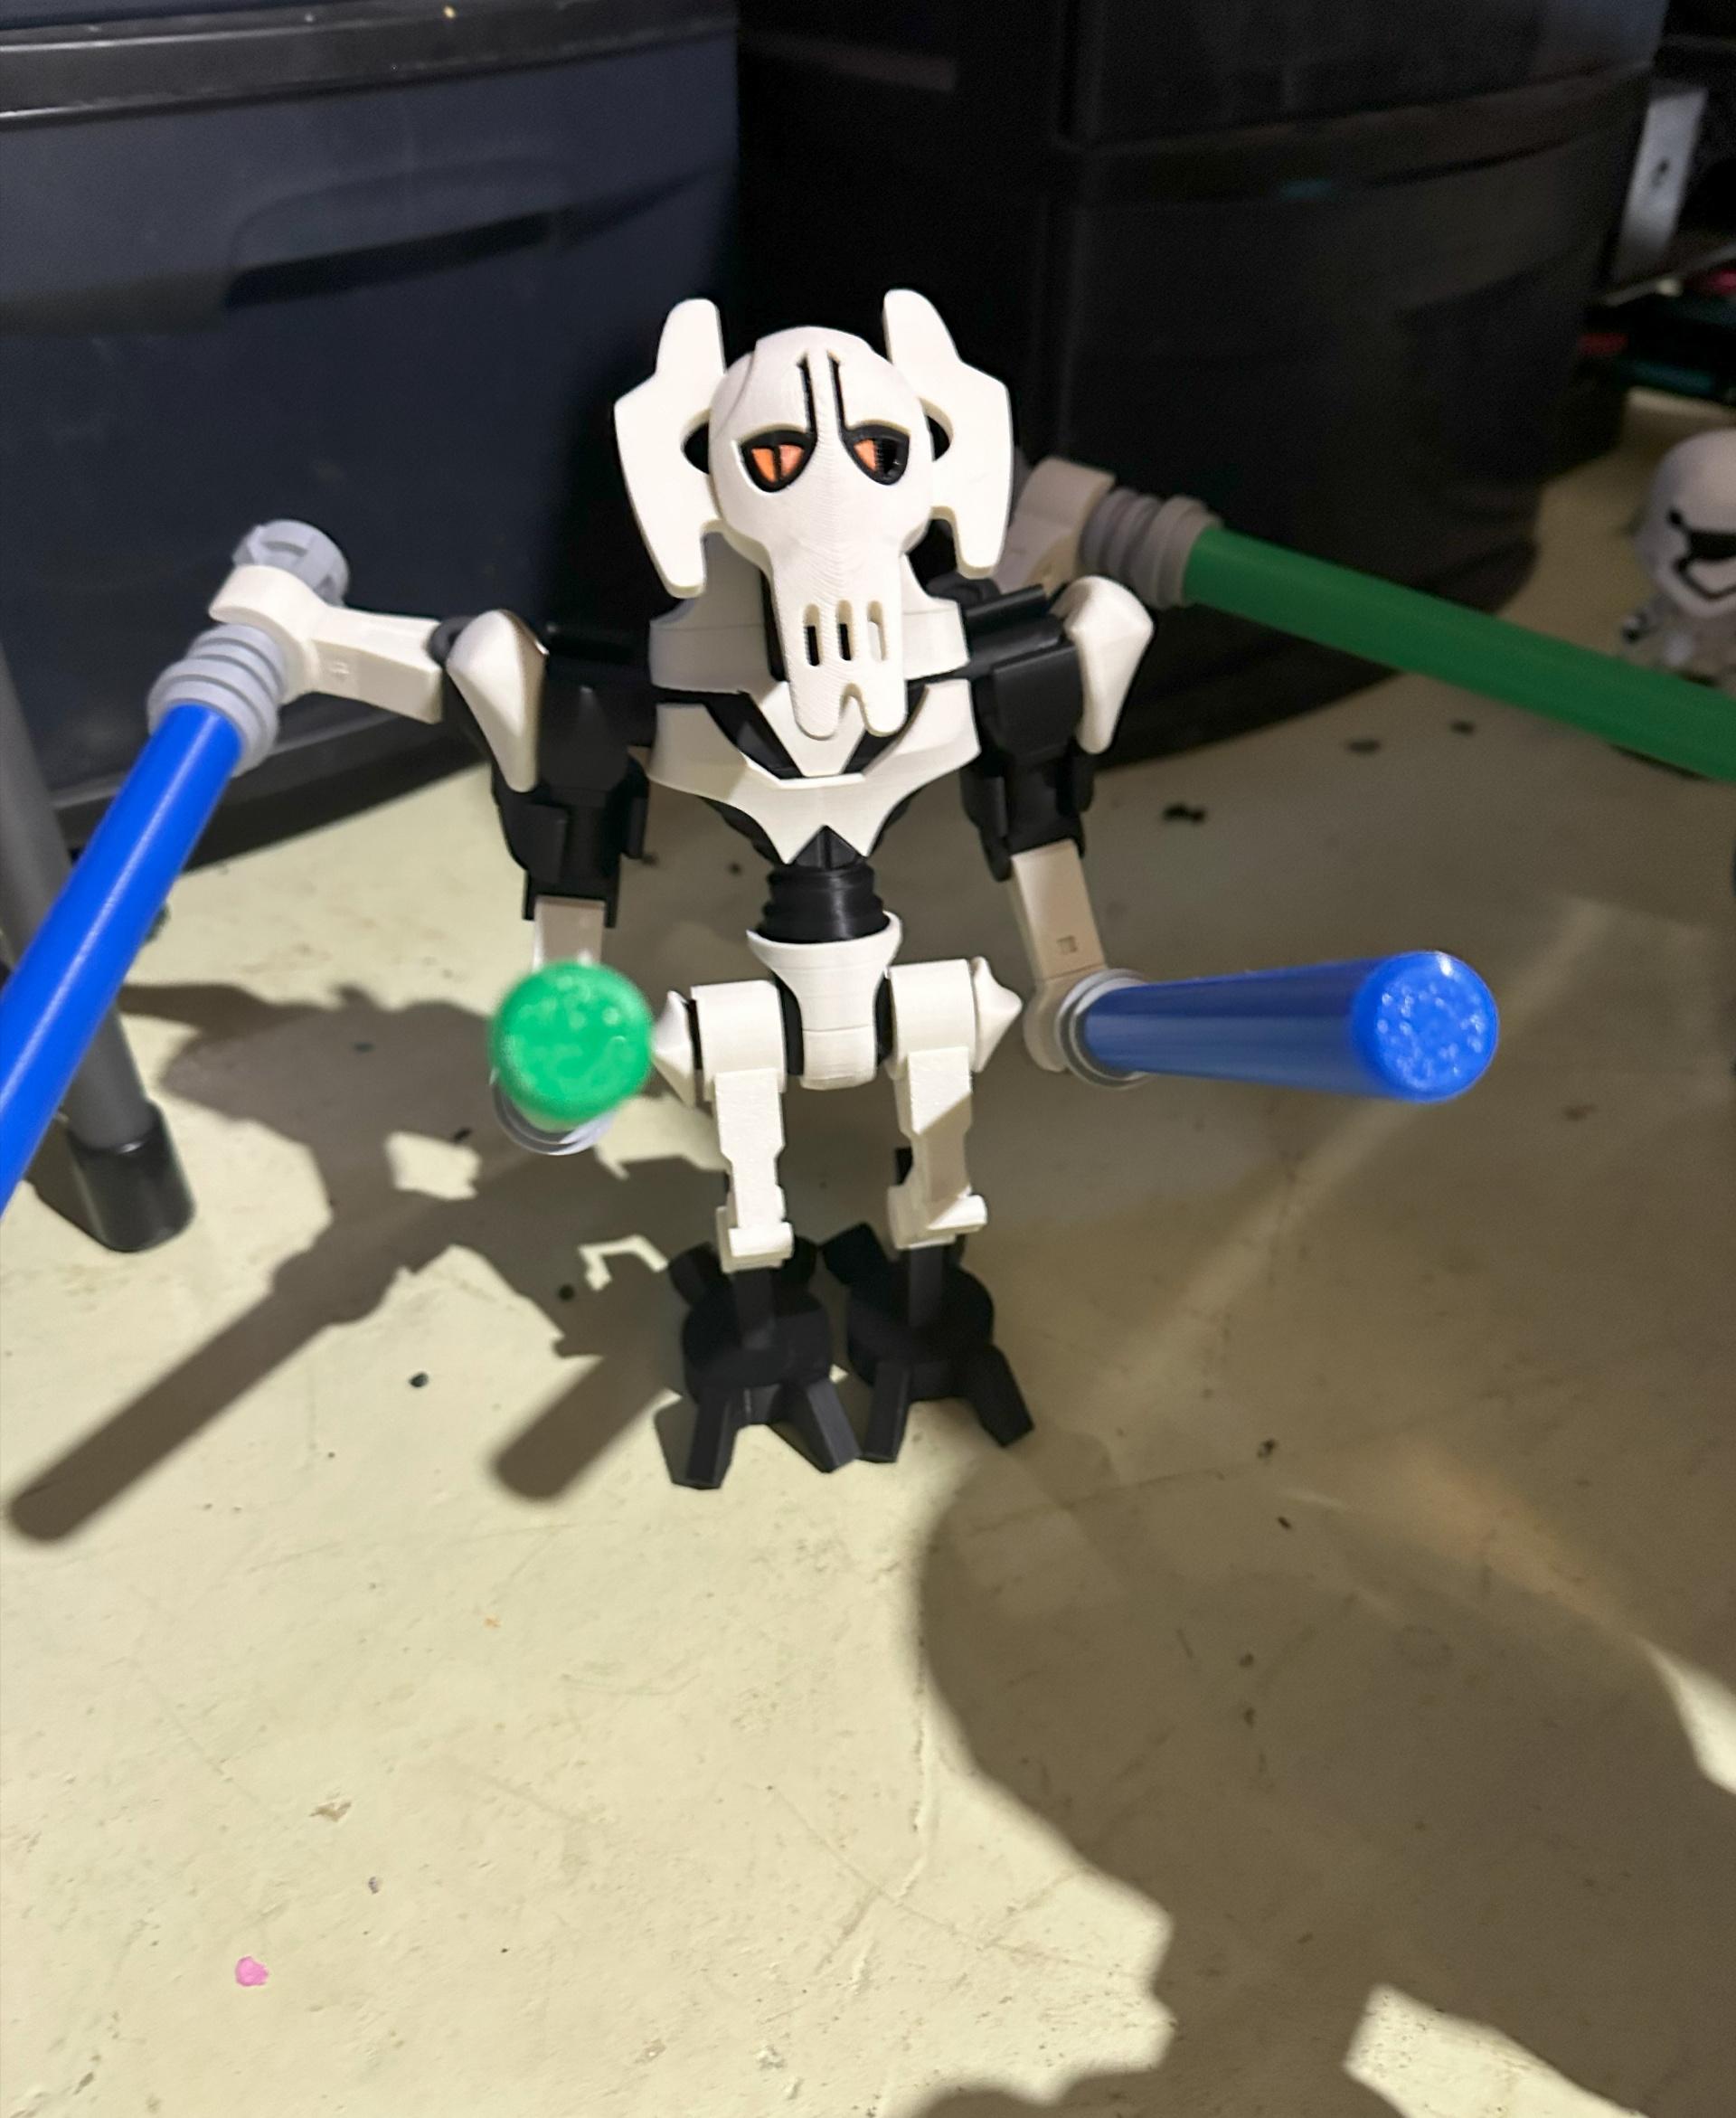 General Grievous (6:1 LEGO-inspired brick figure, NO MMU/AMS, NO supports, NO glue) - Yes, his eye fell out. - 3d model